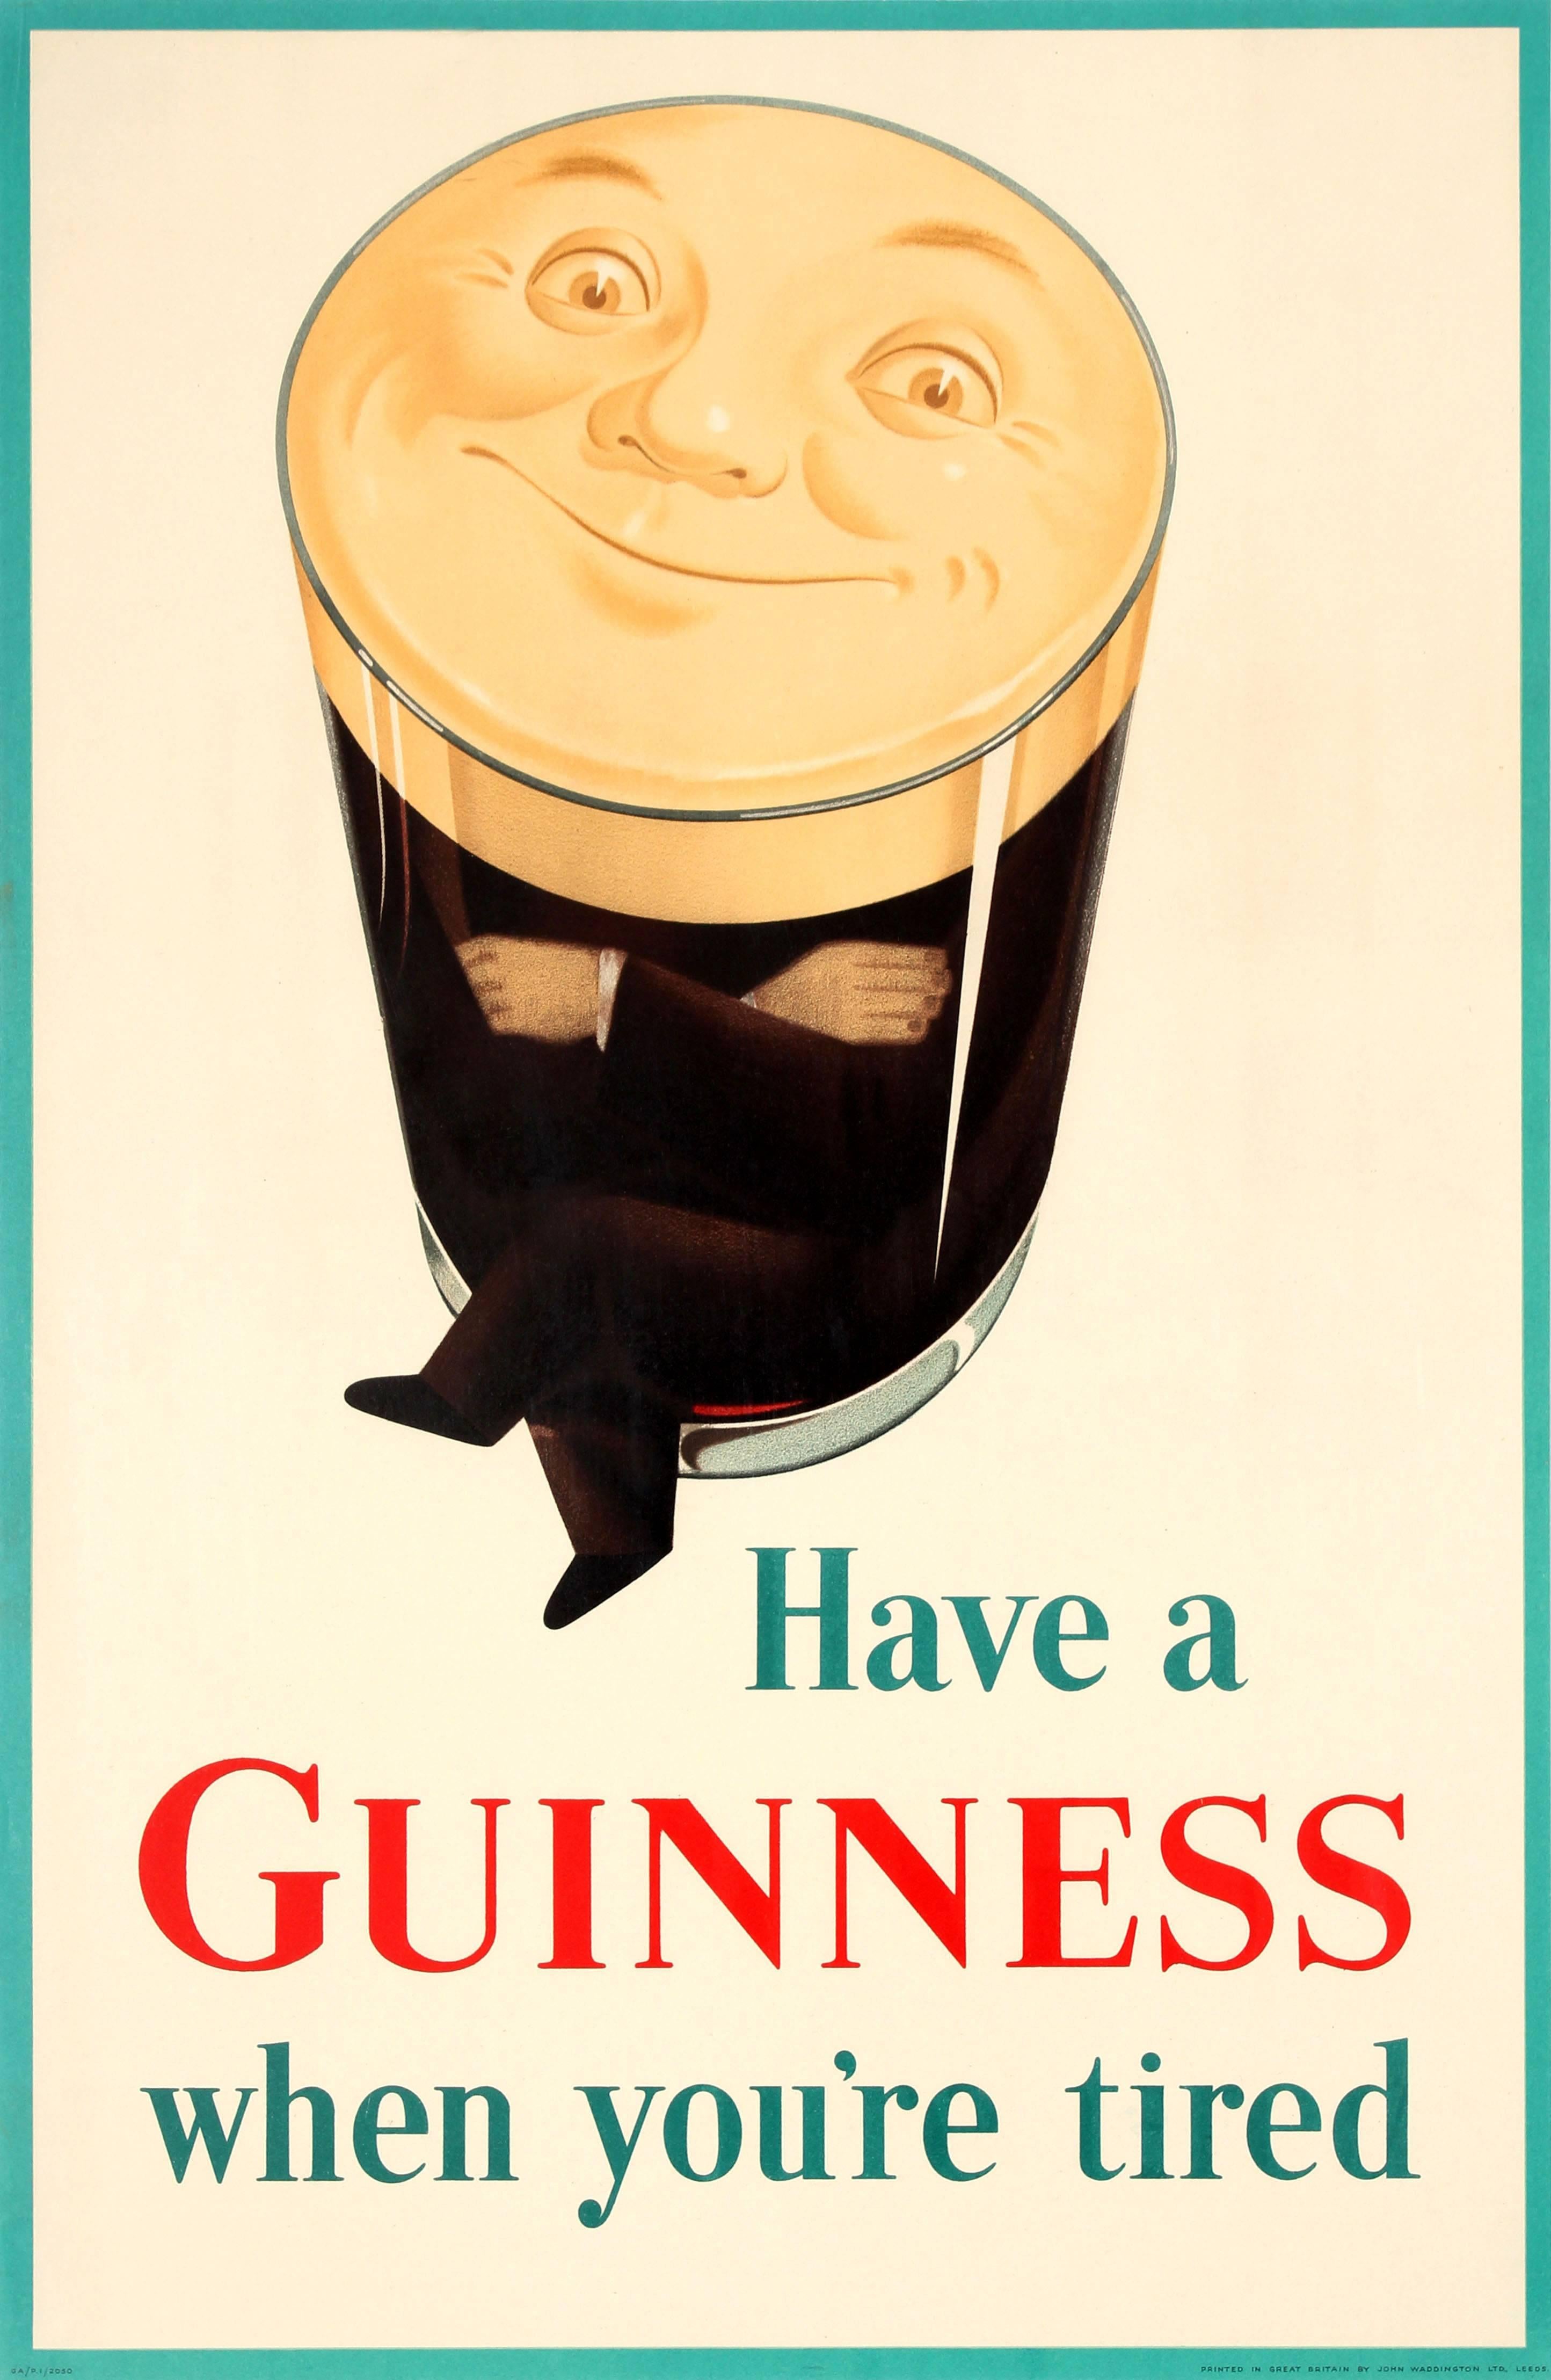 Unknown Print - Original Vintage Iconic Beer Drink Poster - Have A Guinness When You're Tired